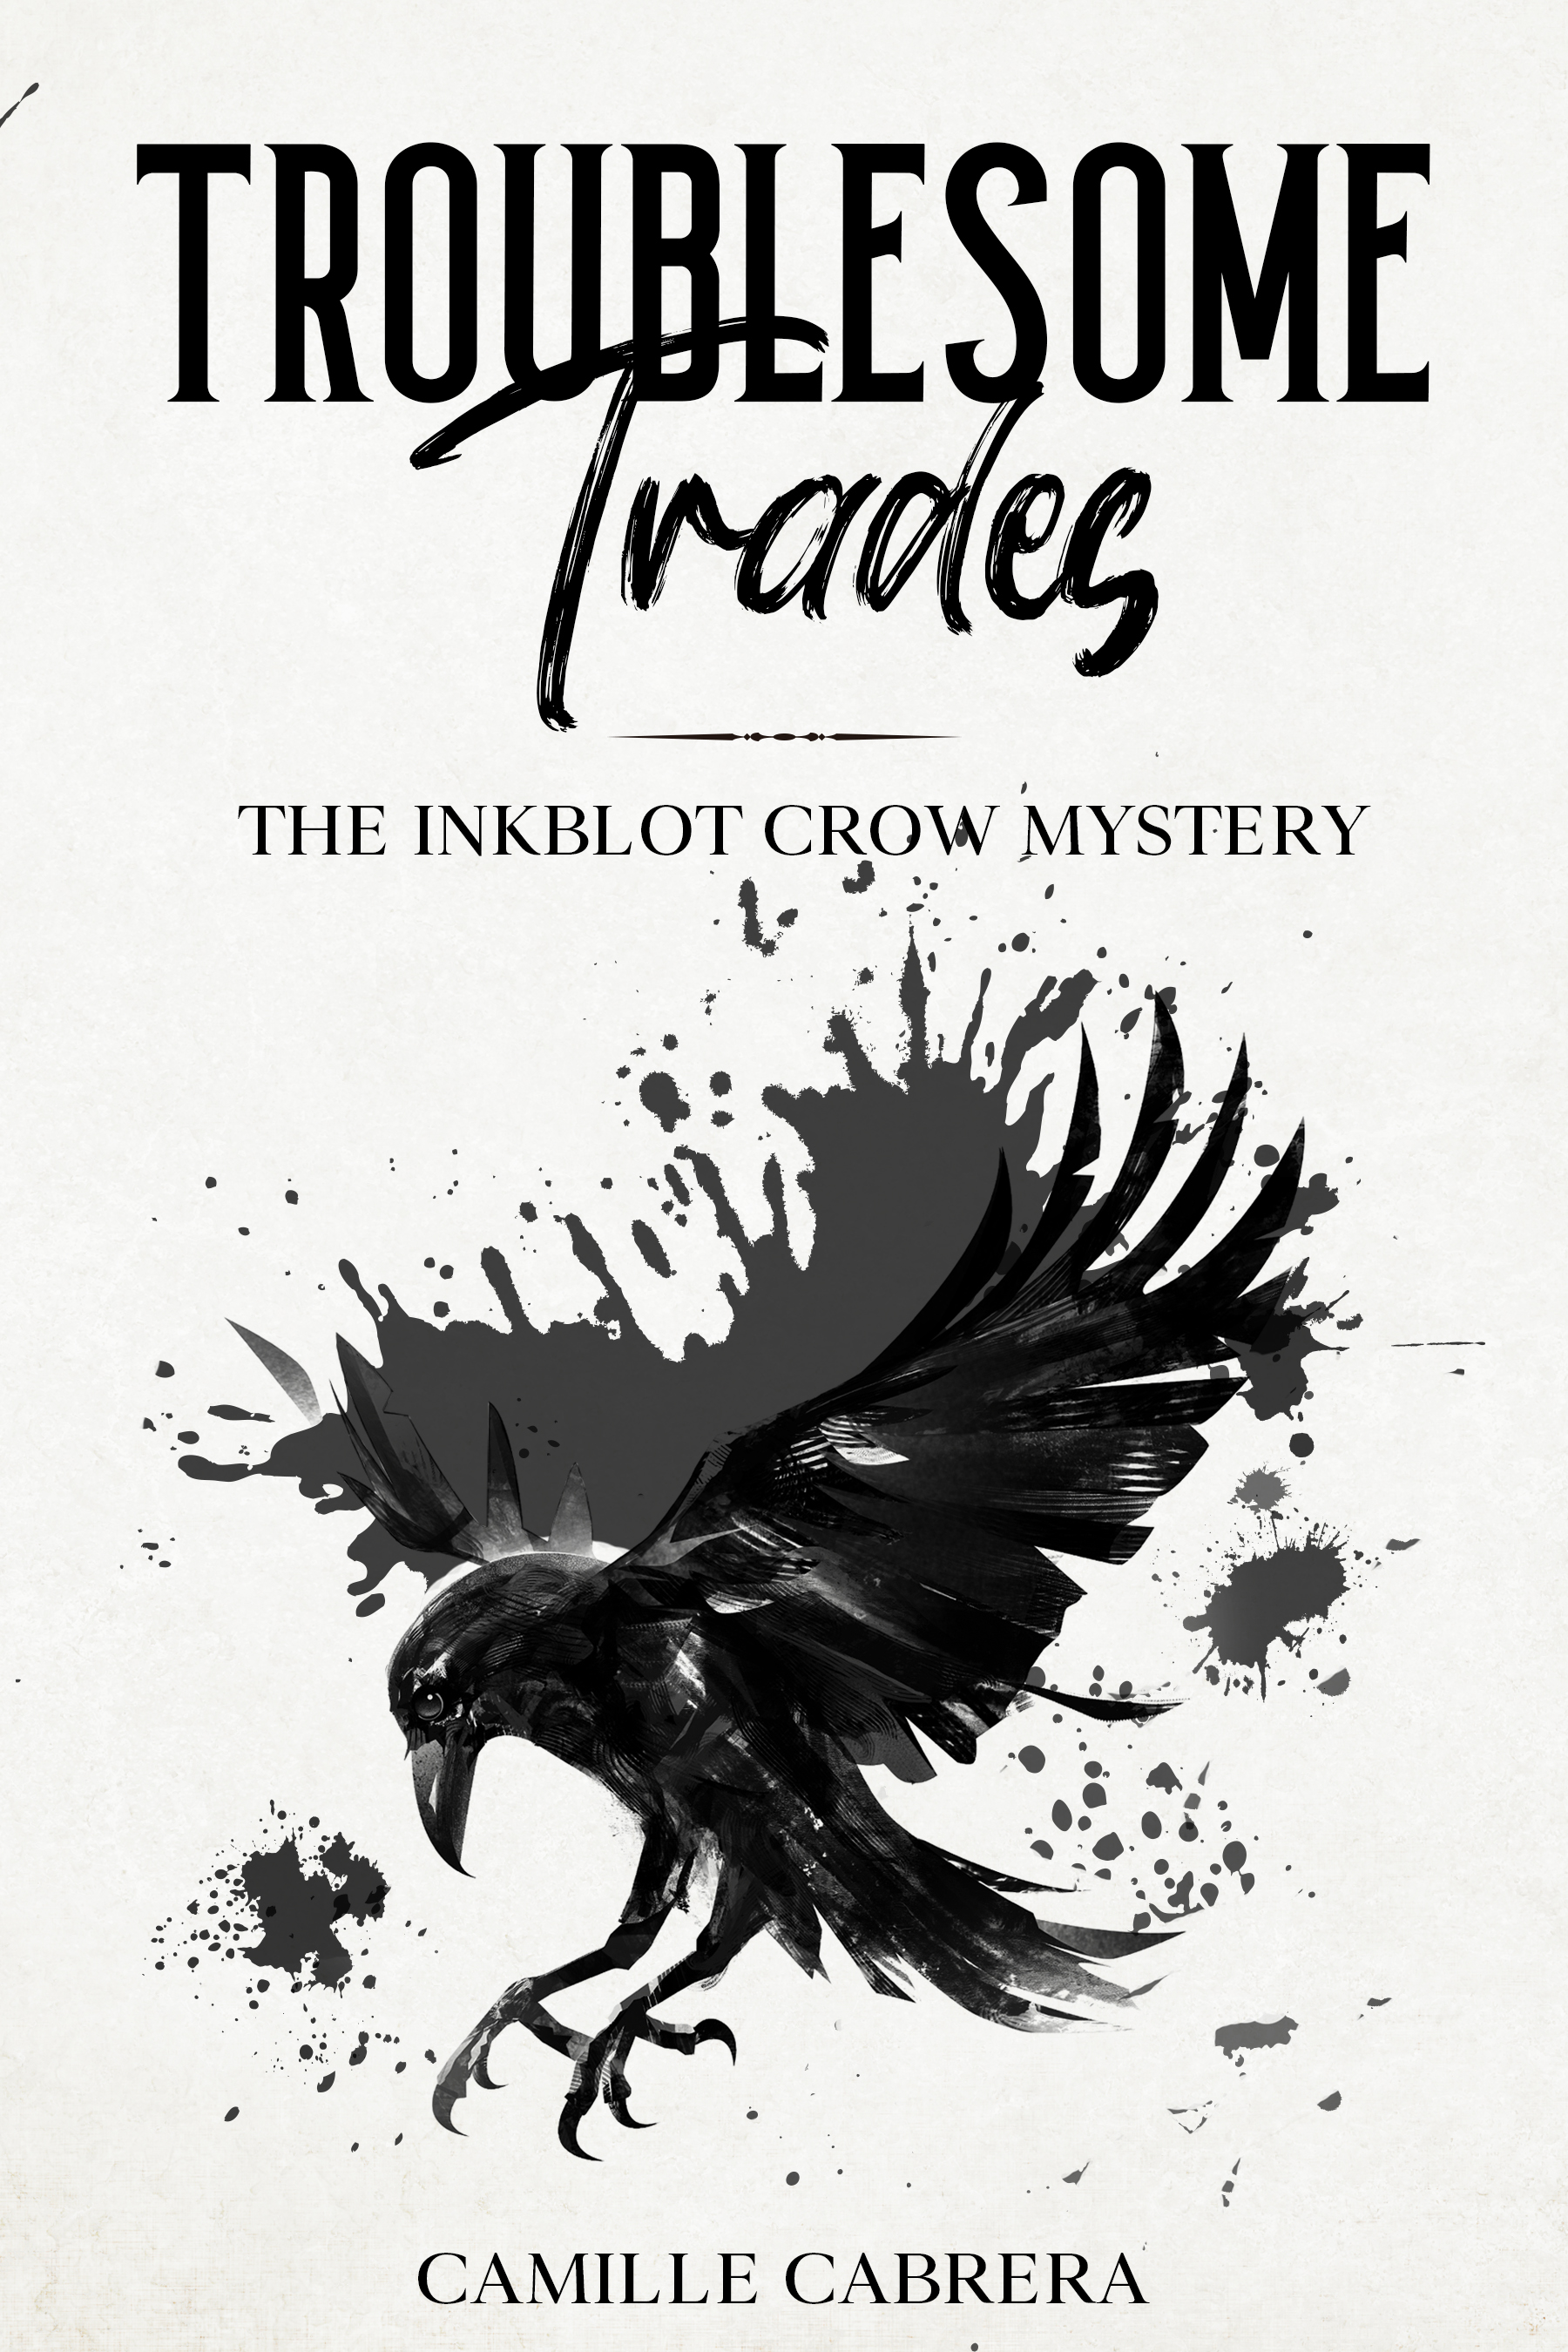 Best selling author Camille Cabrera releases her engaging short story, Troublesome Trades: The Inkblot Crow Mystery